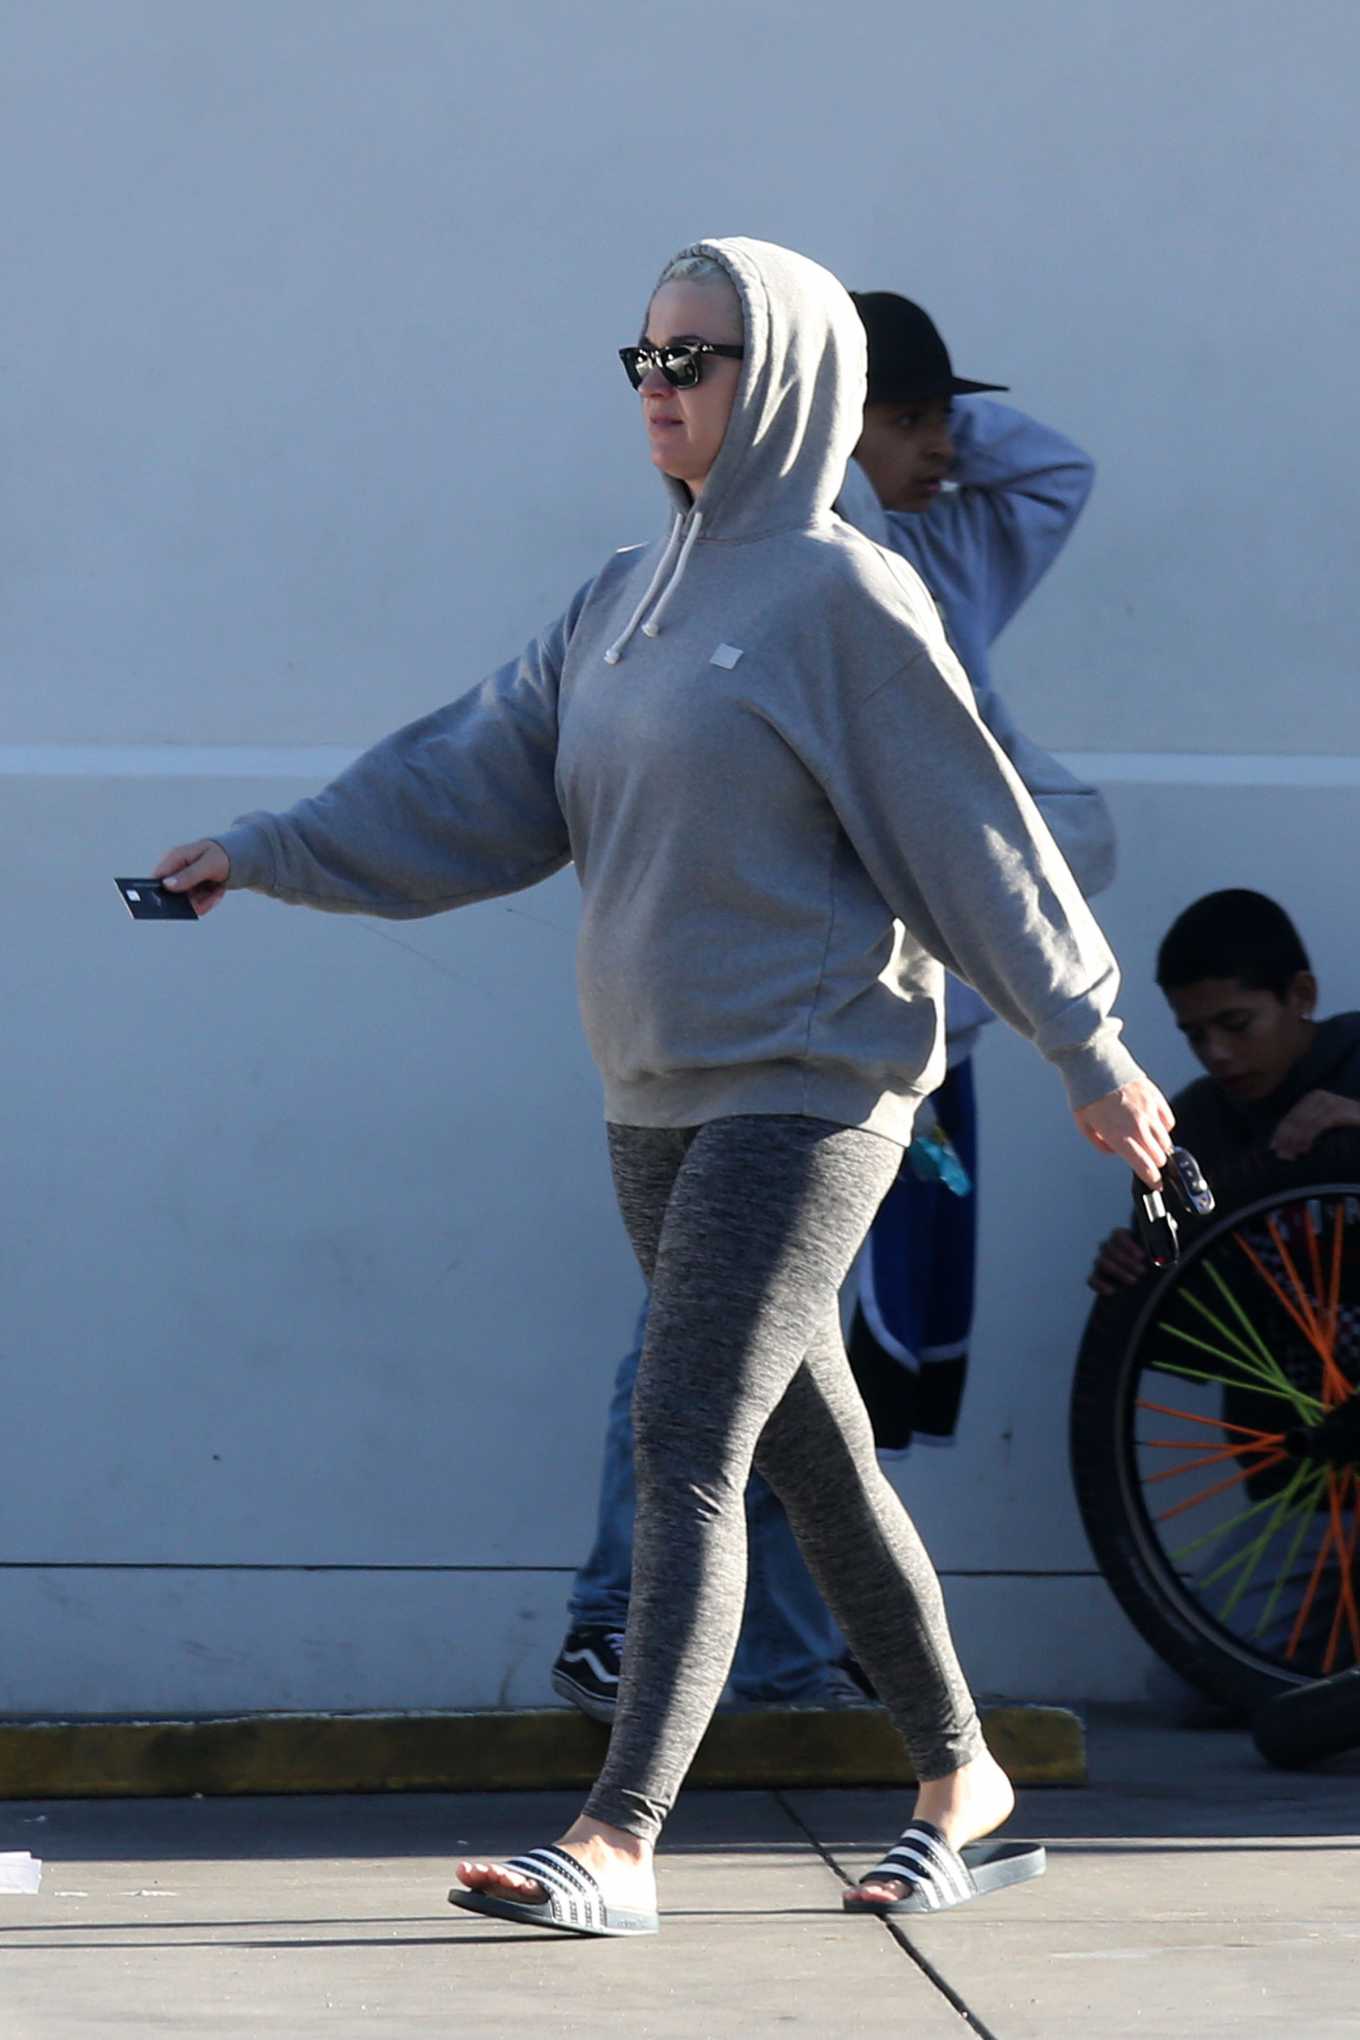 Katy Perry â€“ Wearing All Grey at a Gas Station Shop in California